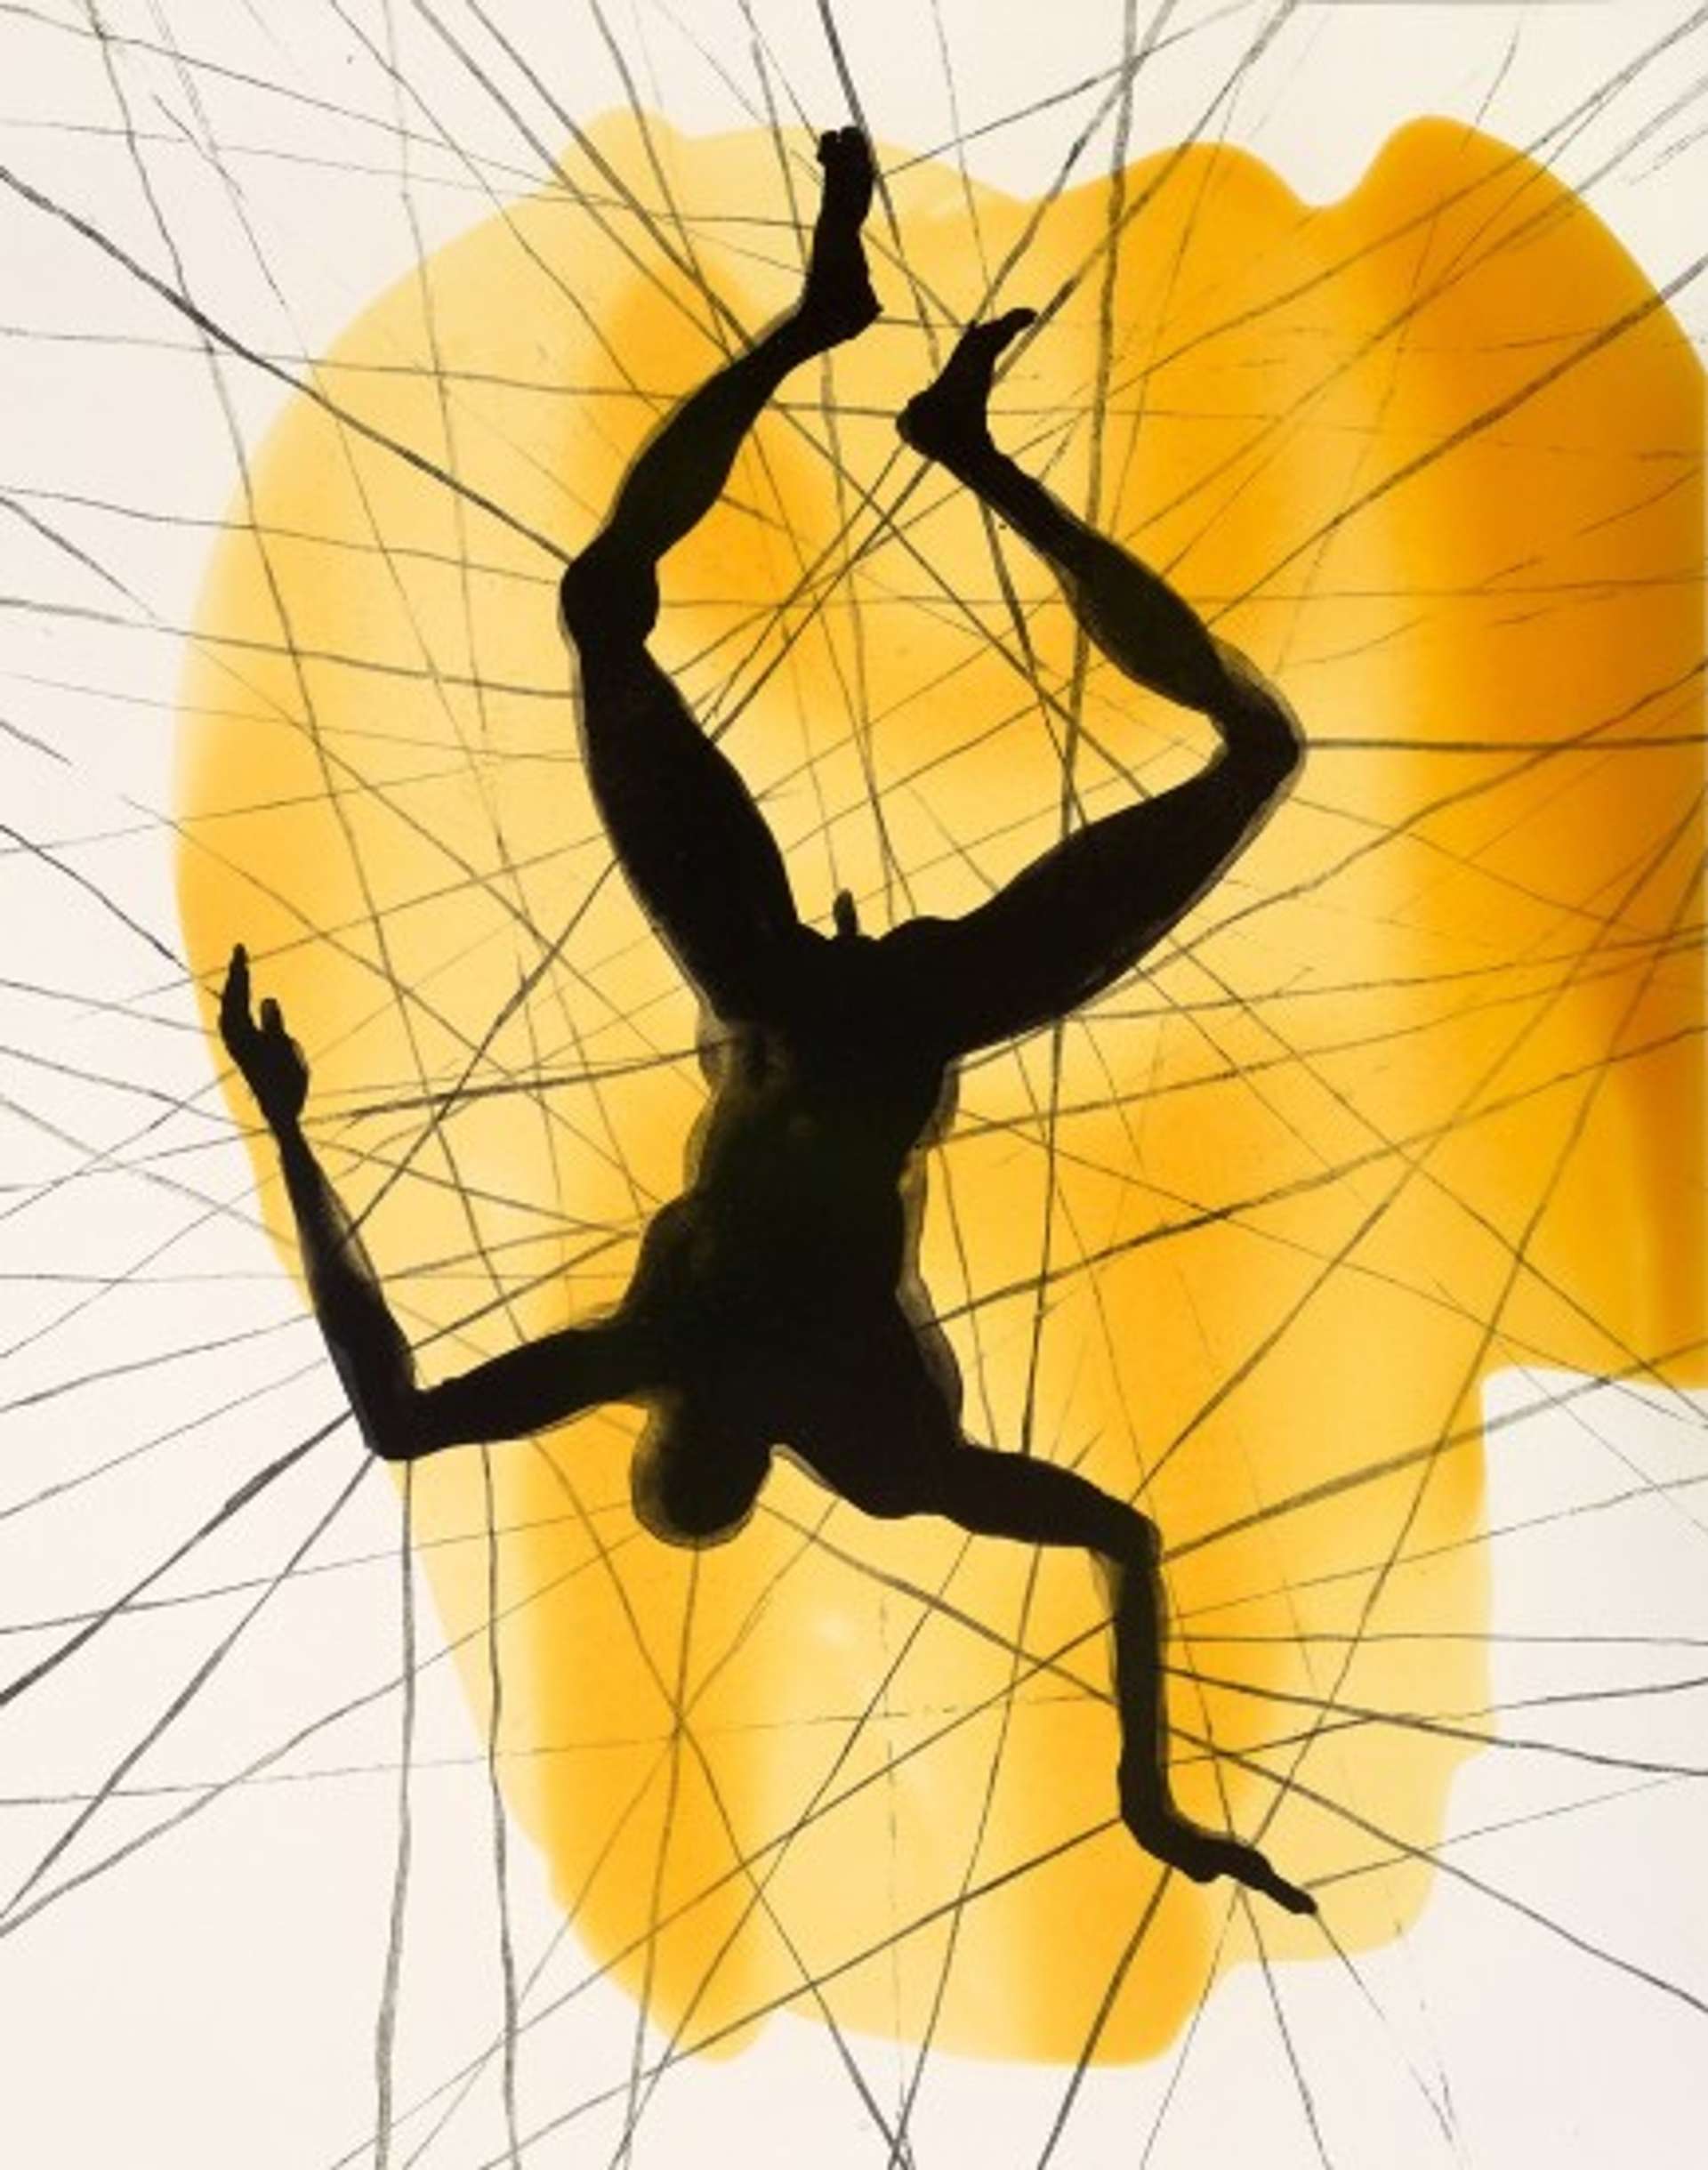 an image of a print by Antony Gormley, named Free. It depicts a black human silhouette flailing in the centre of the composition, against a background of black straight lines and a yellow gradient.